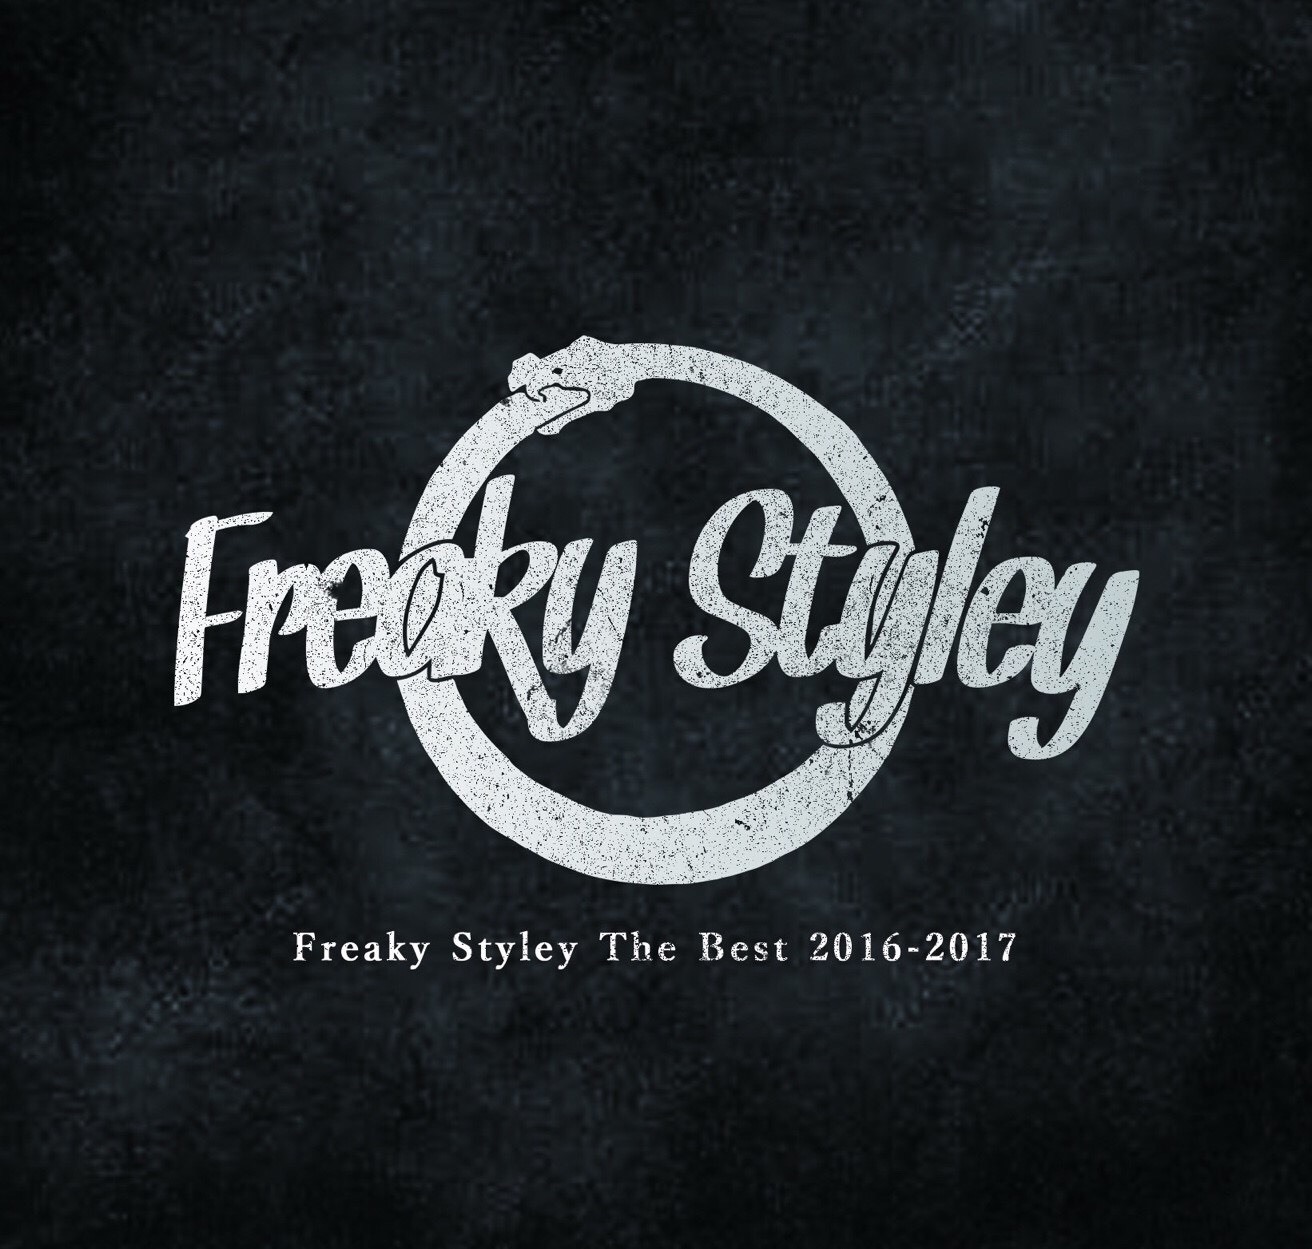 Freaky Styley The Best 2016-2017